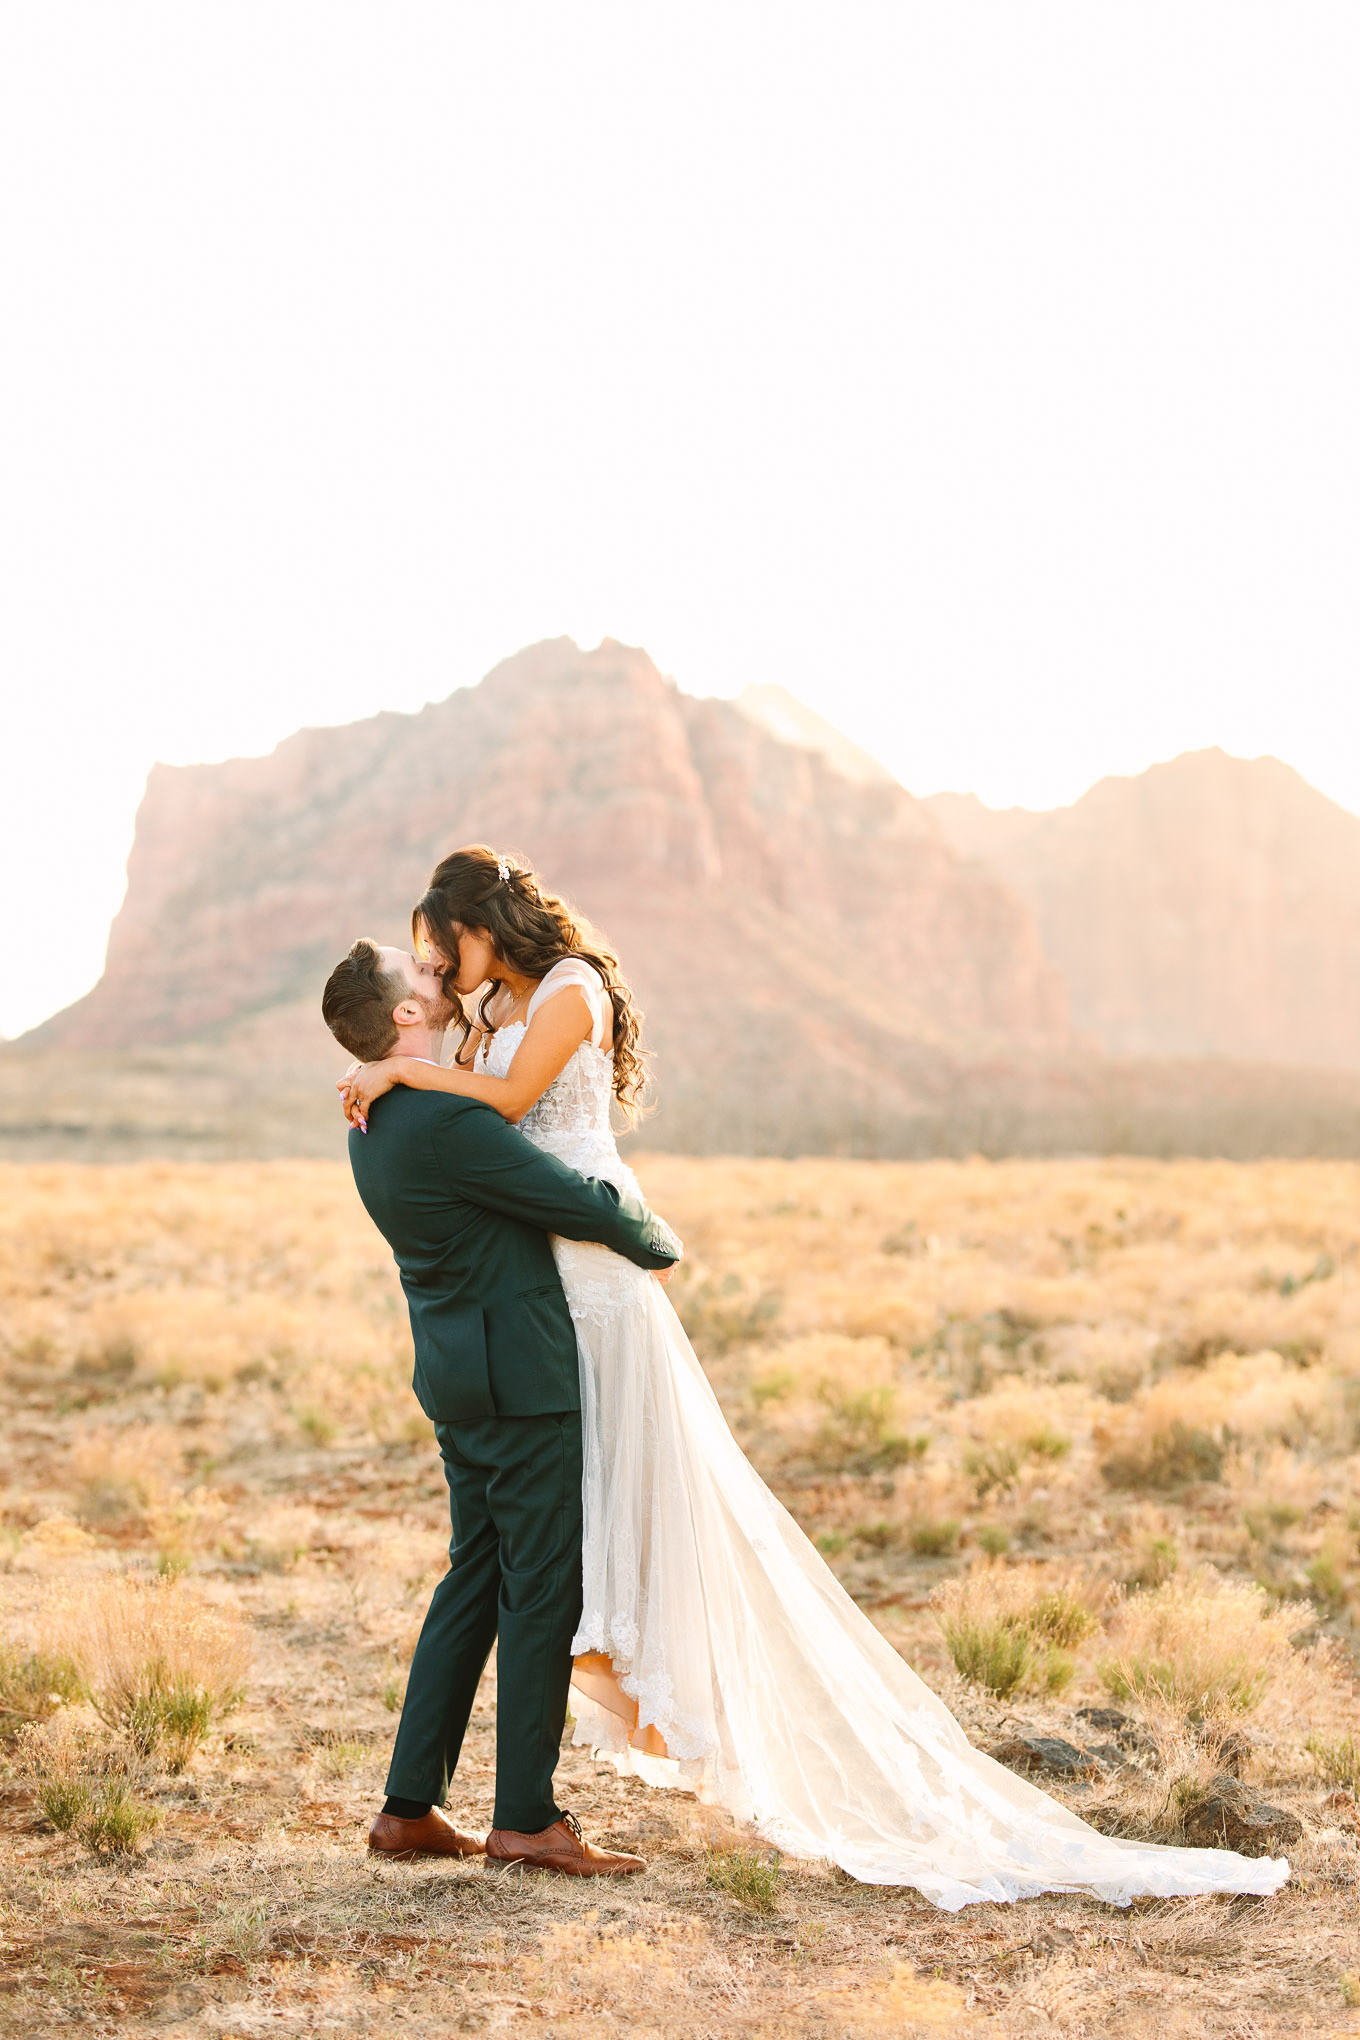 Bride kissing groom in green suit portraits | Zion Under Canvas camping elopement at sunrise | Colorful elopement photography | #utahelopement #zionelopement #zionwedding #undercanvaszion #sunriseelopement #adventureelopement  Source: Mary Costa Photography | Los Angeles